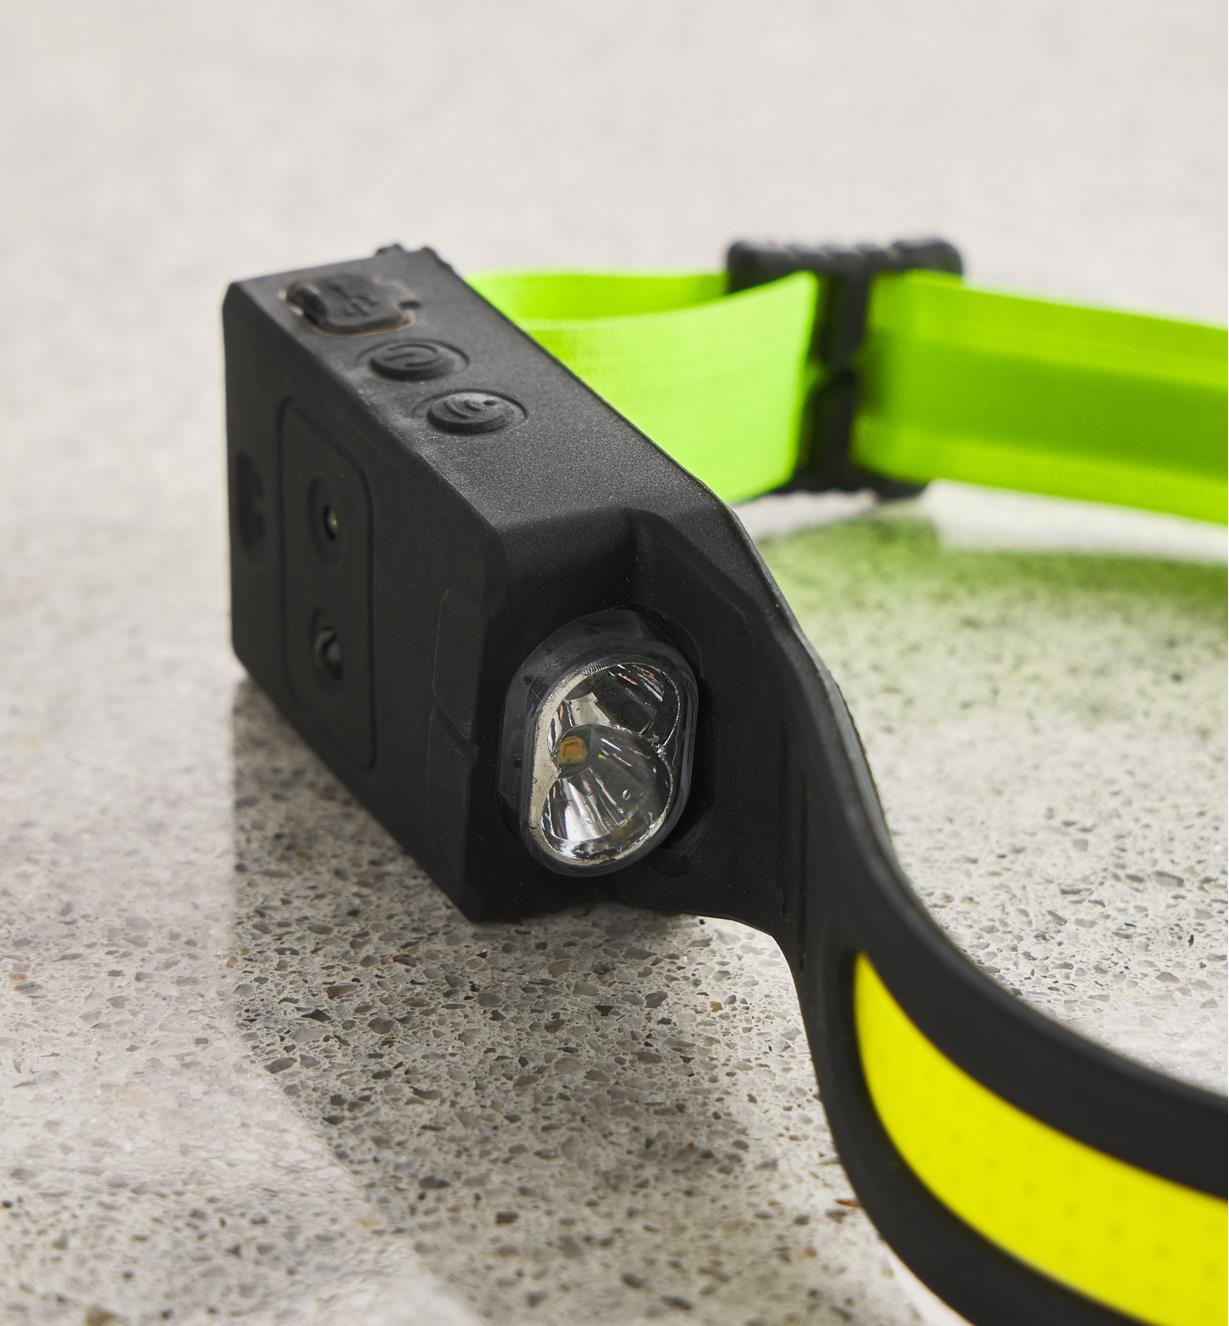 A close-up view of the COB headlamp’s water-resistant housing